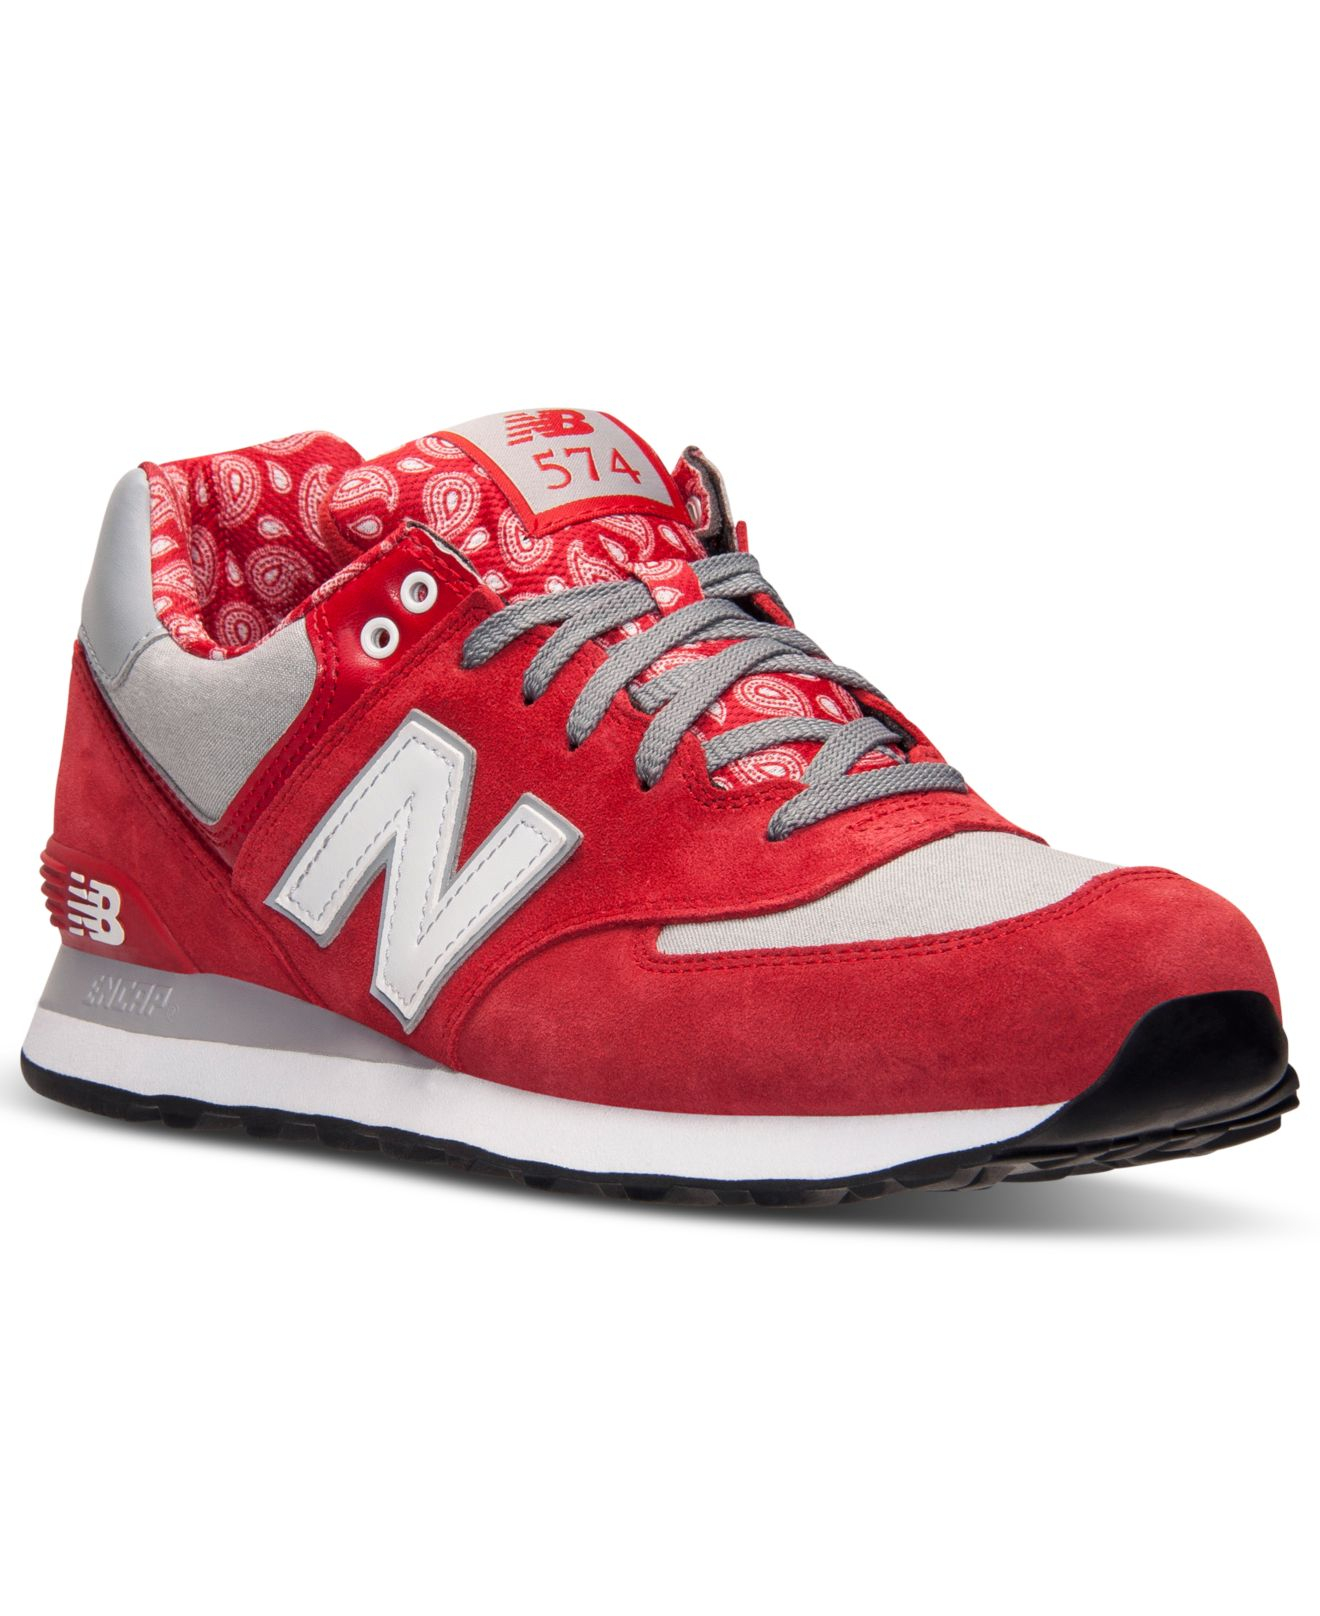 New balance Men's 574 Paisley Casual Sneakers From Finish Line in Red ...